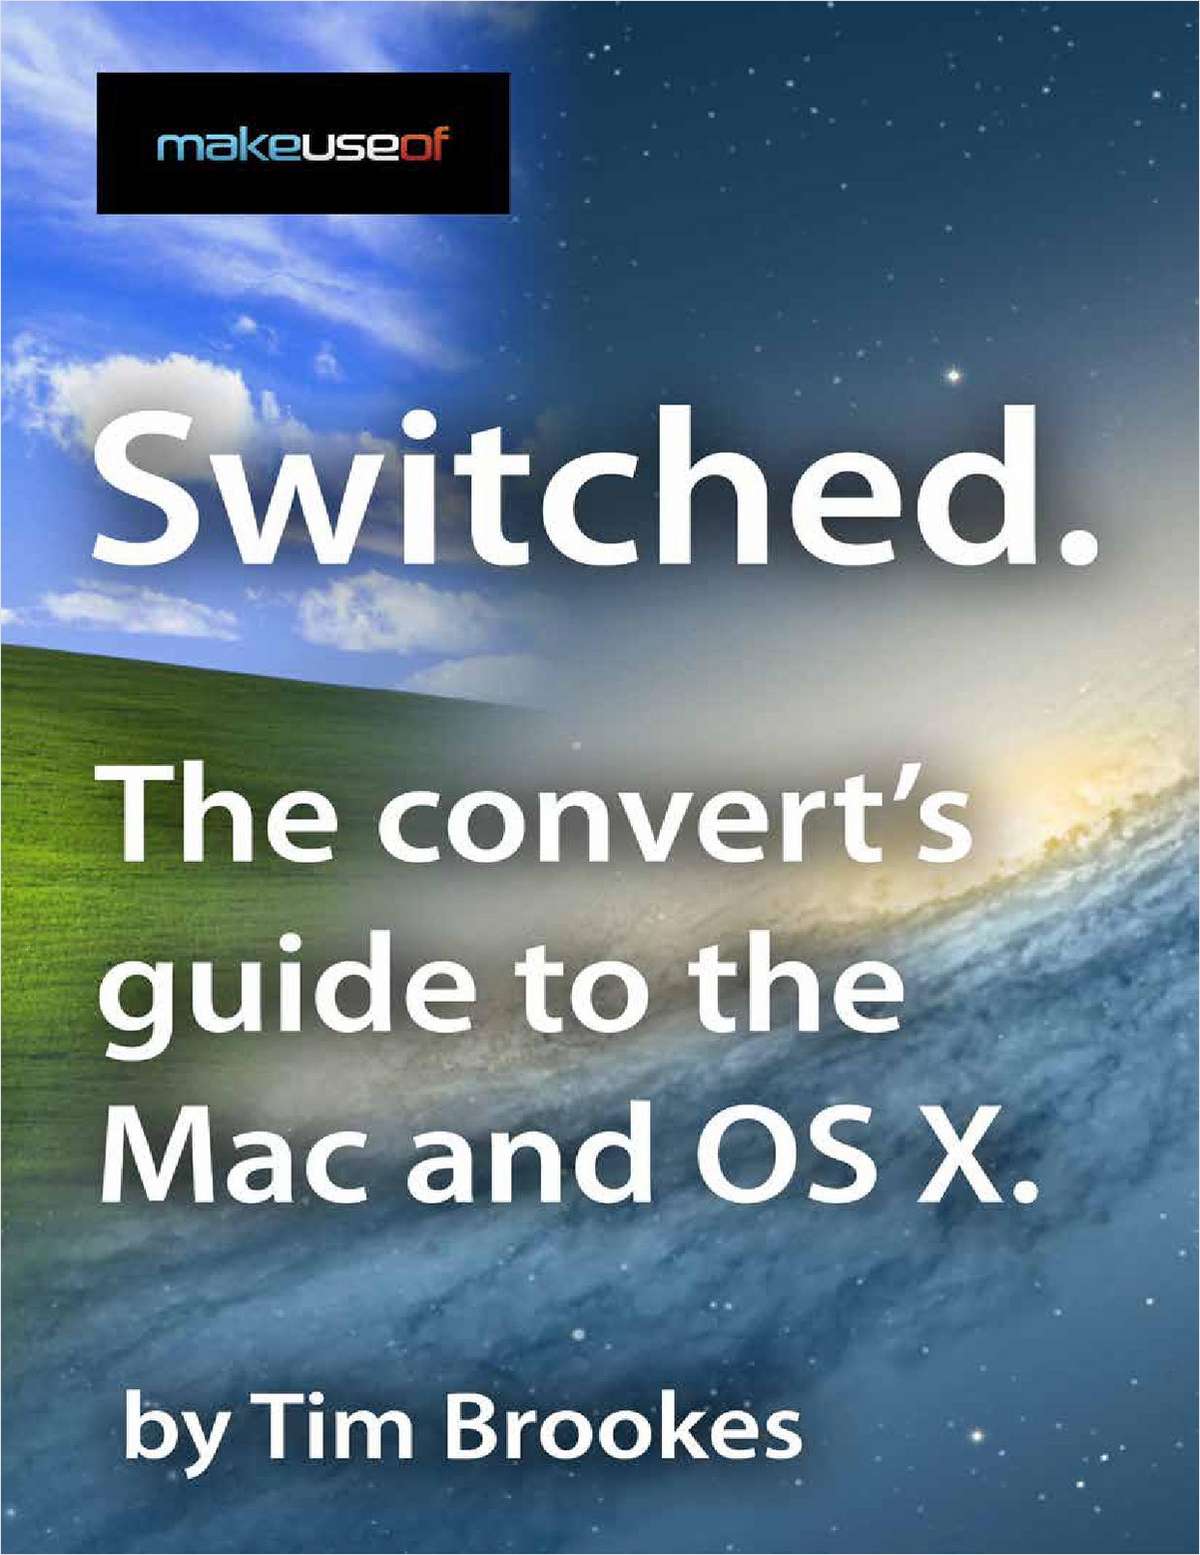 Switched. The Convert's Guide to The Mac and OS X